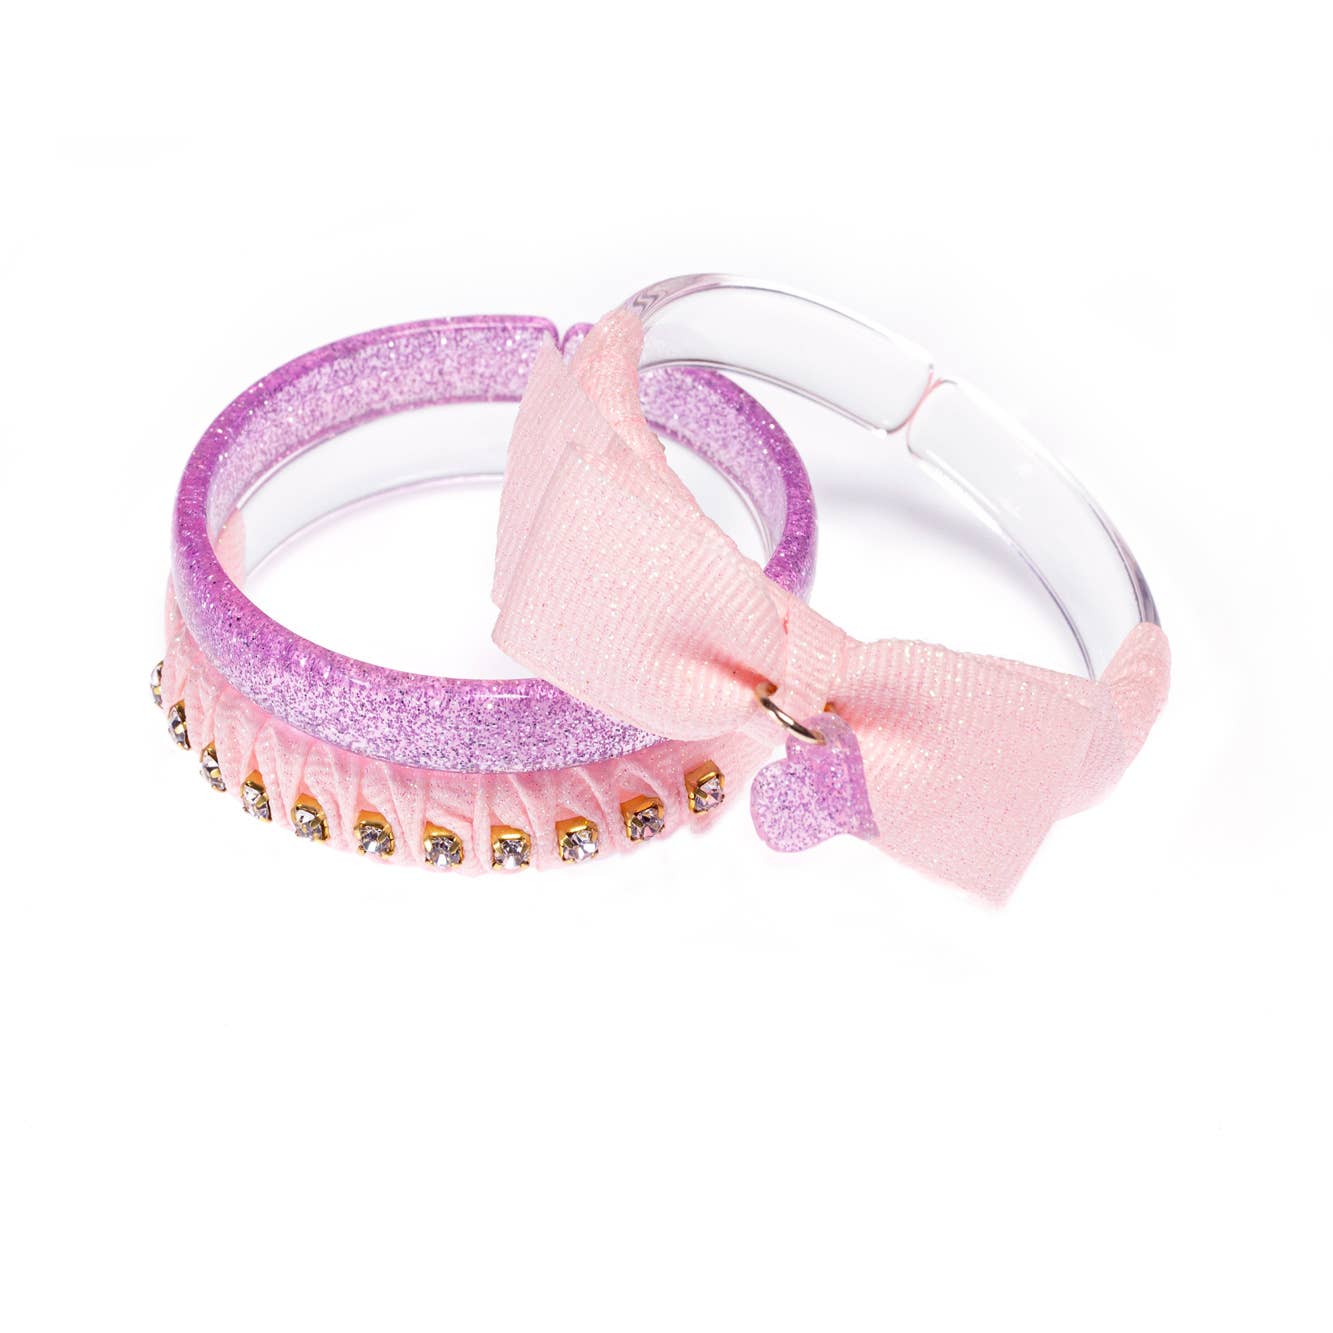 Lilies & Roses NY - Fancy Pink Fabric Bangle Set/3